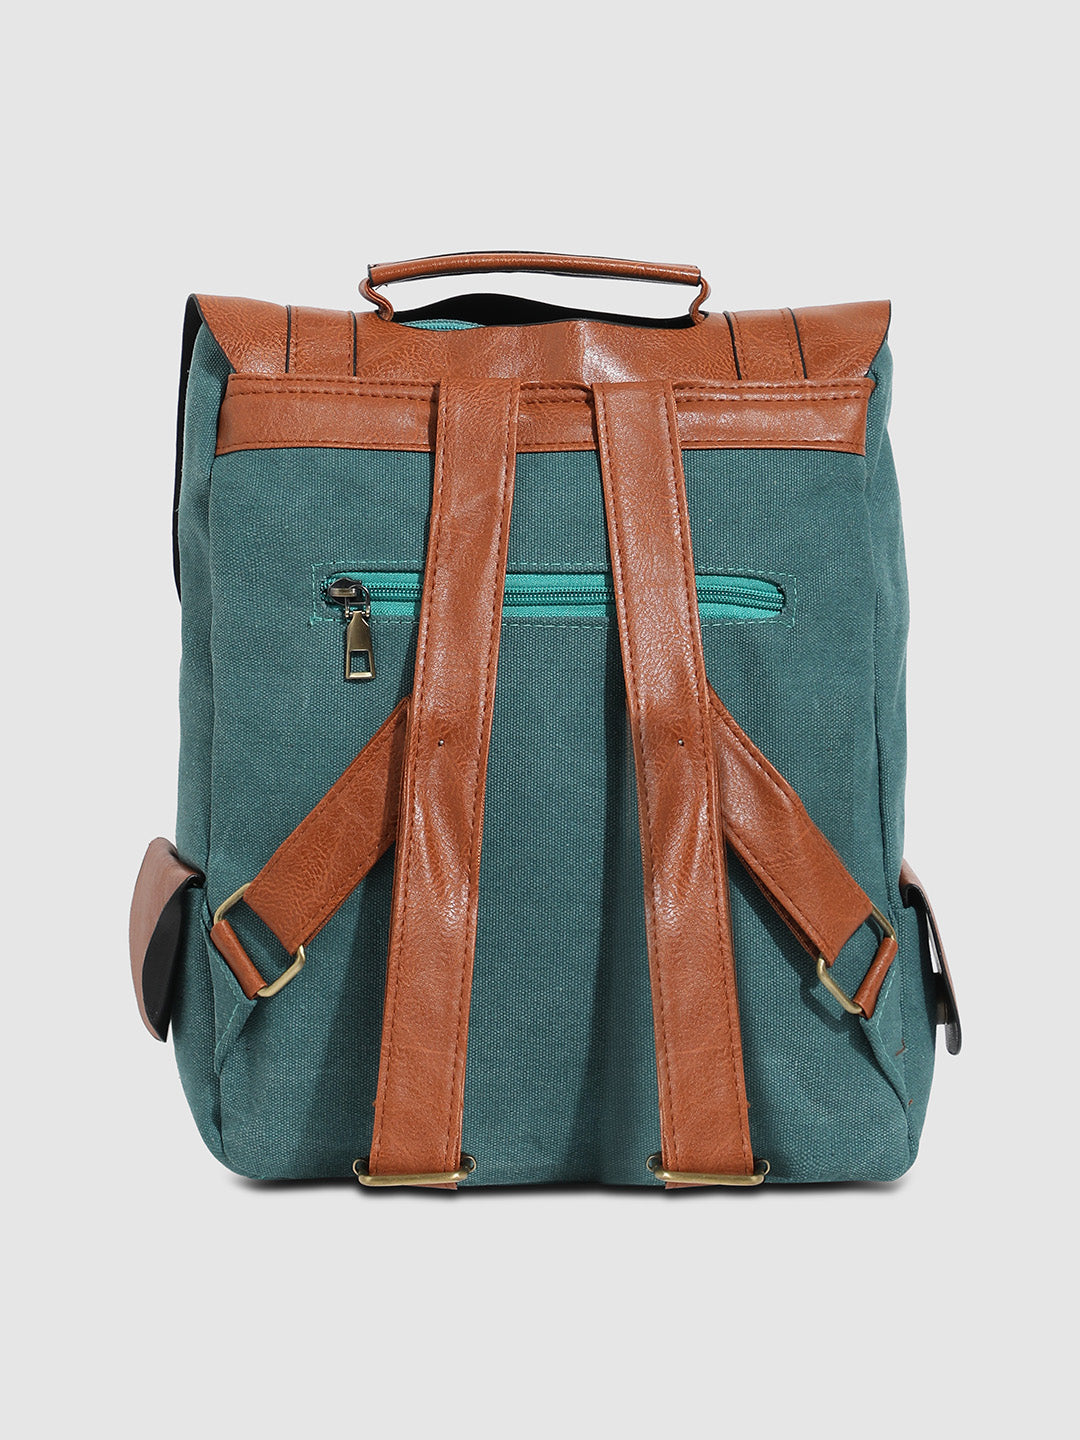 The Journey Backpack - Teal Green & Brown